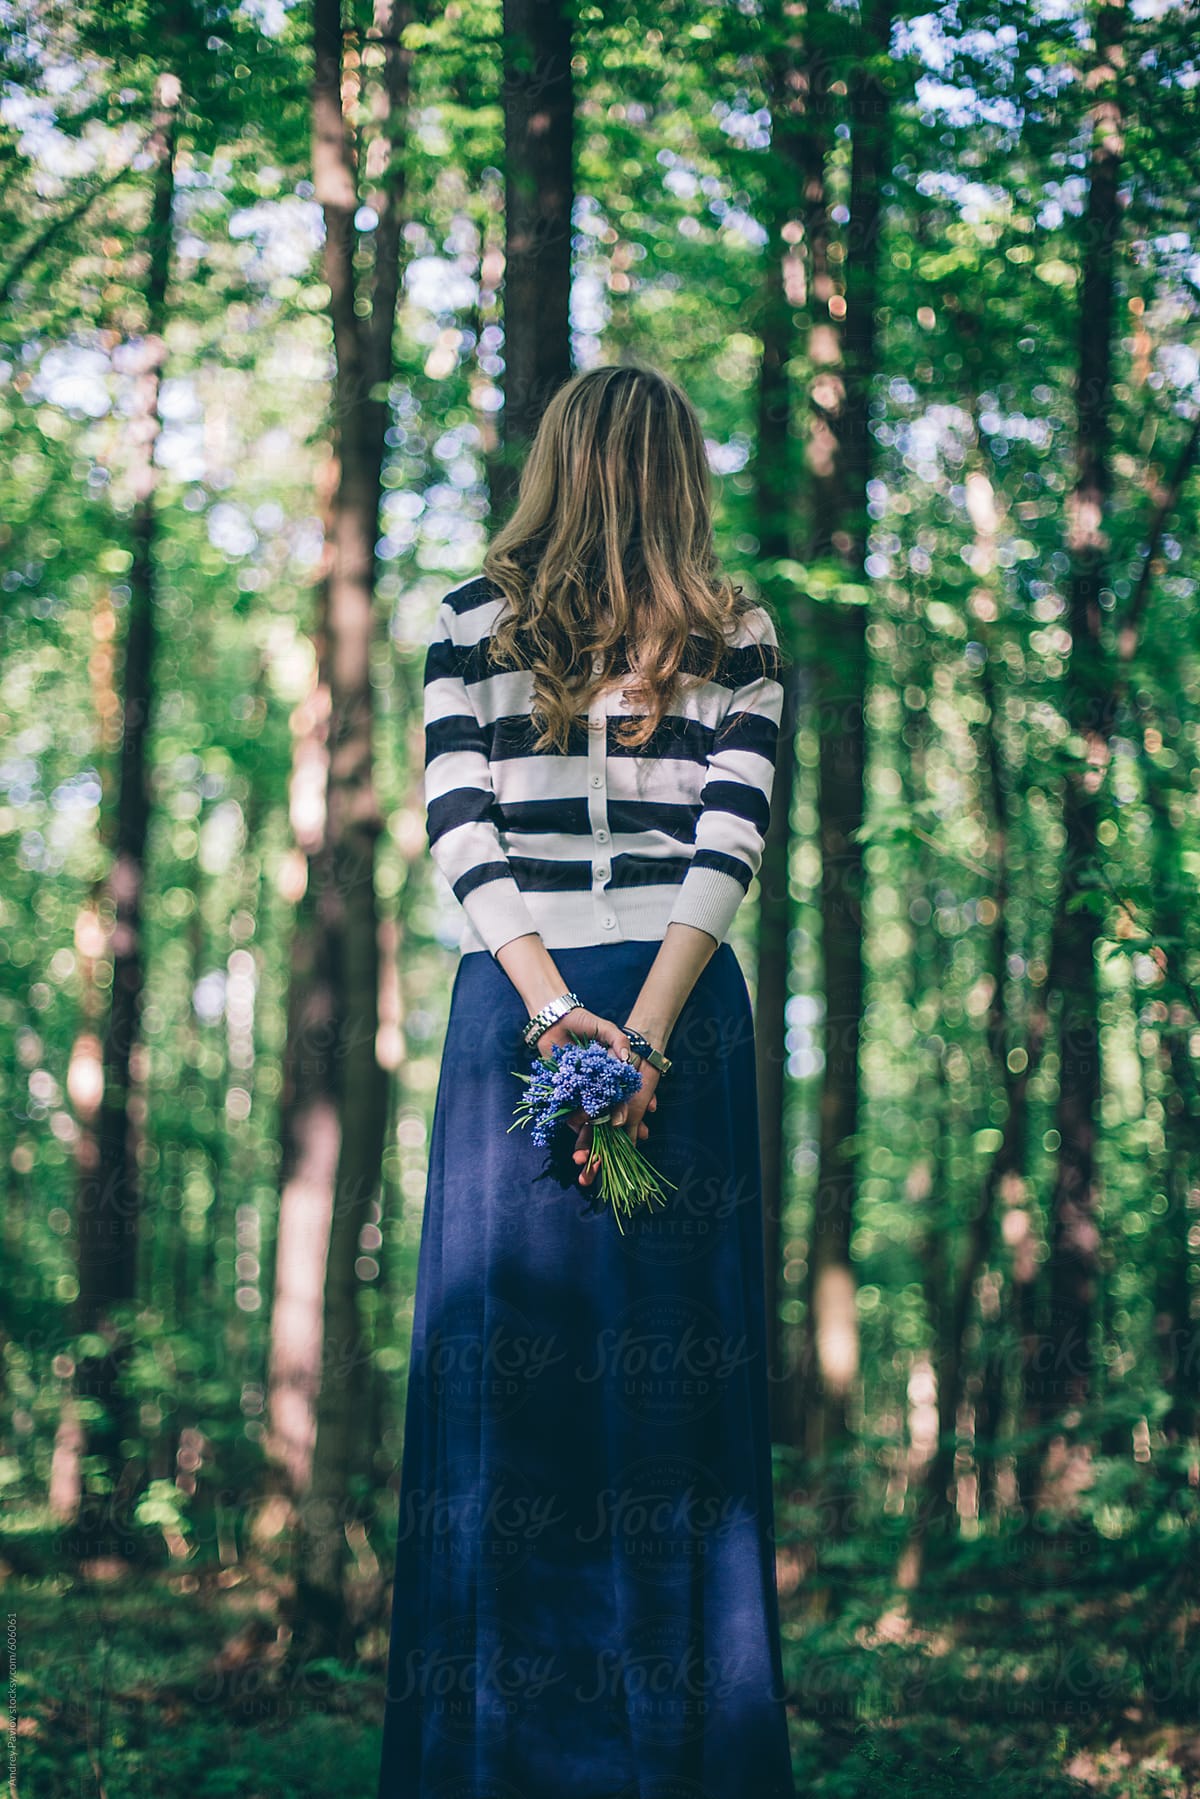 Young woman dressed in a stripped blouse and skirt in a forest from behind